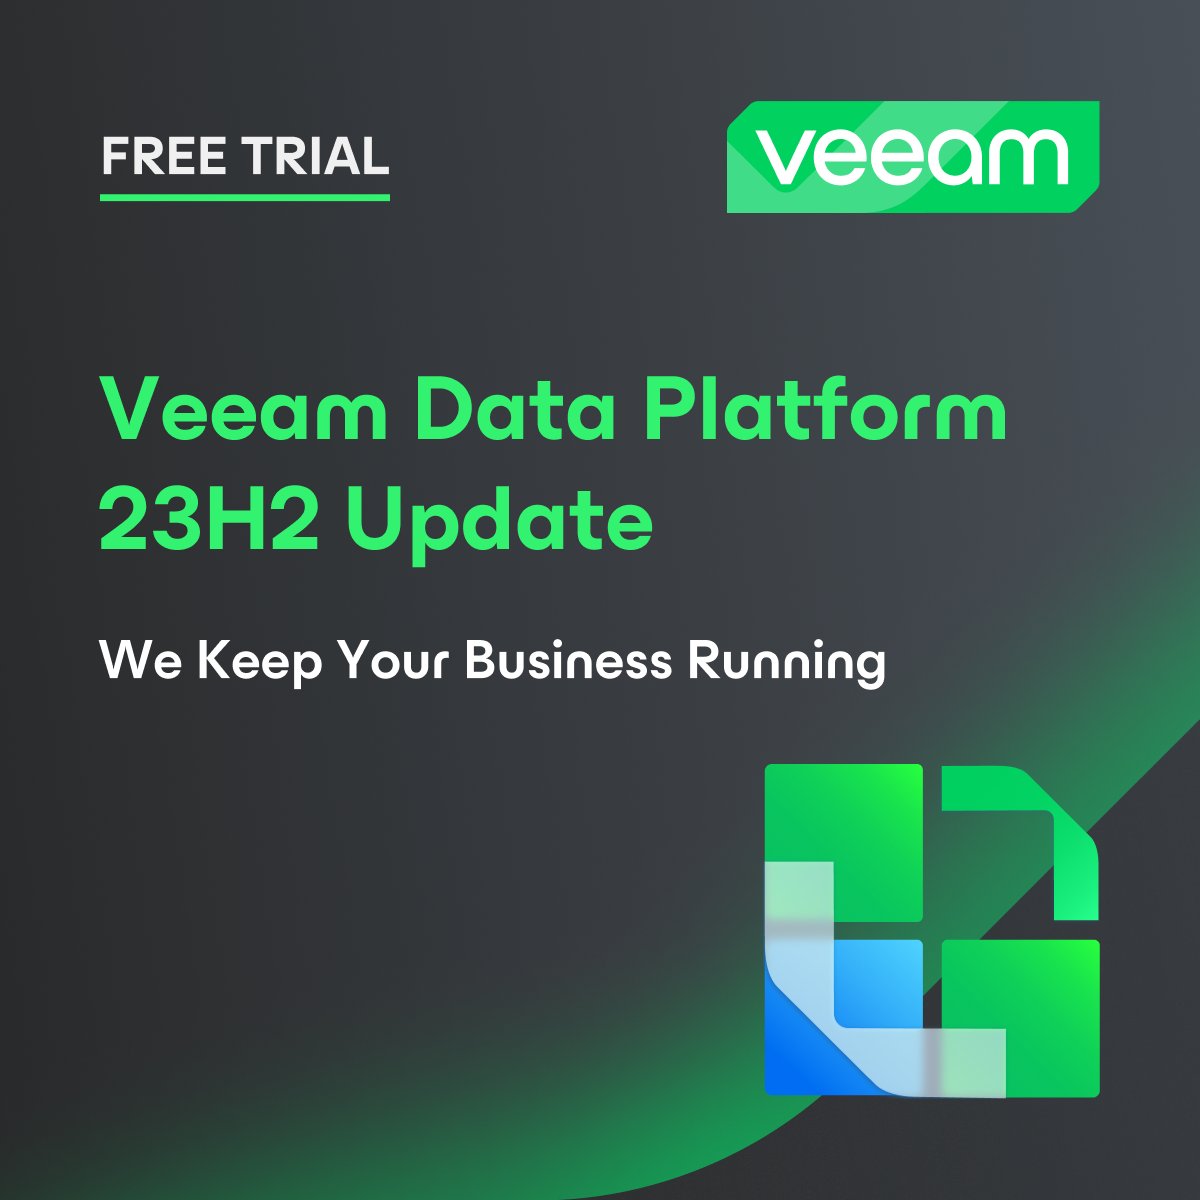 🚀 Exciting News: Veeam v12.1 is out! 🛡️ Enhanced security, AI Assistant, object storage backup, and more! 📦💻 Upgrade now for top-notch data protection! 🔐 
Check the Link Below to Find Out More!

#Veeam #VeeamV12 #DataSecurity #BackupUpgrade